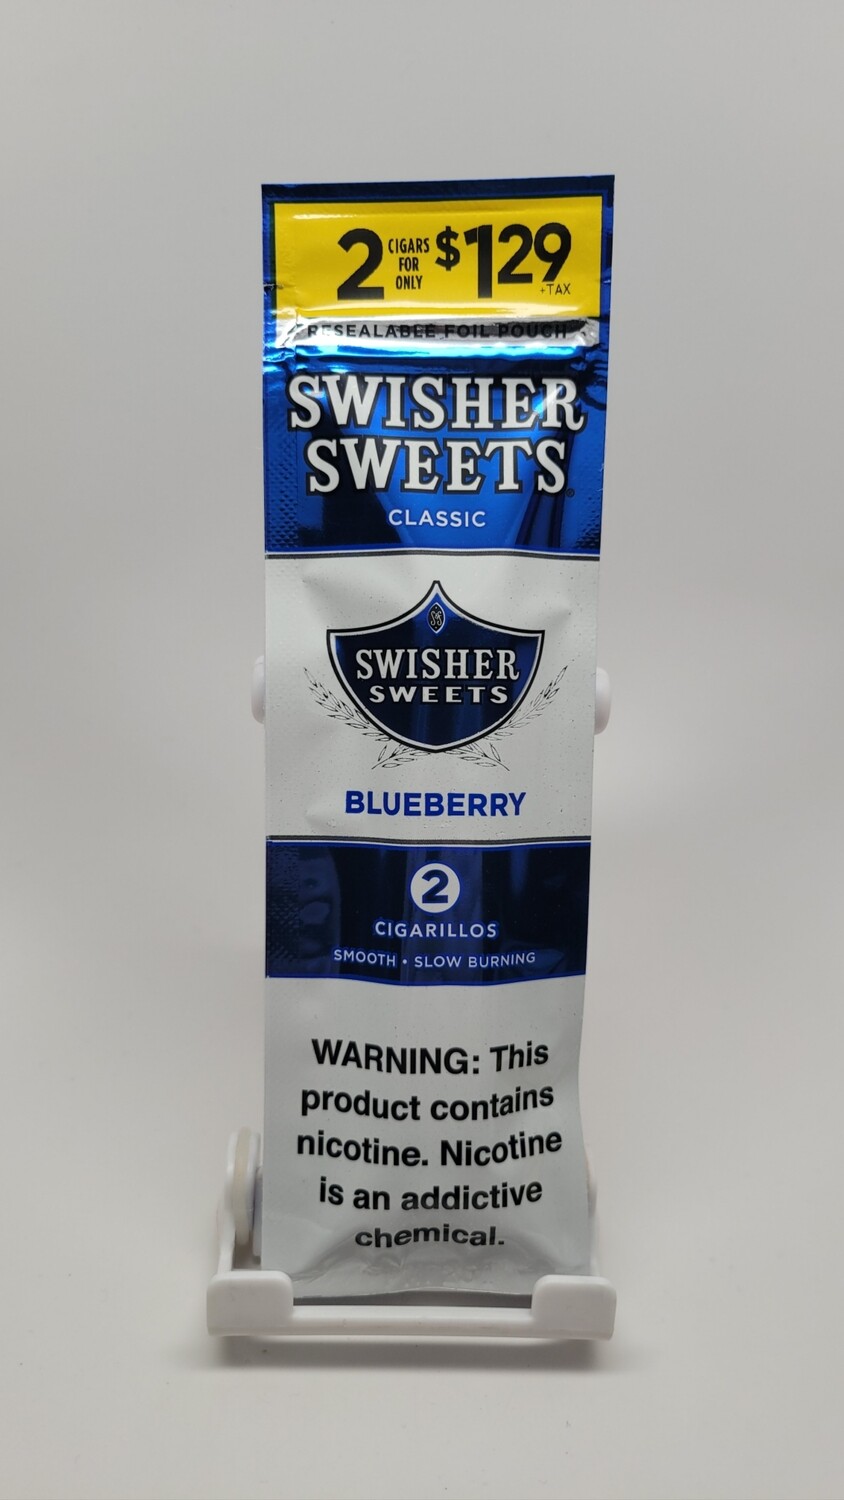 Swisher Sweets 2 Cigarillos Blueberry 